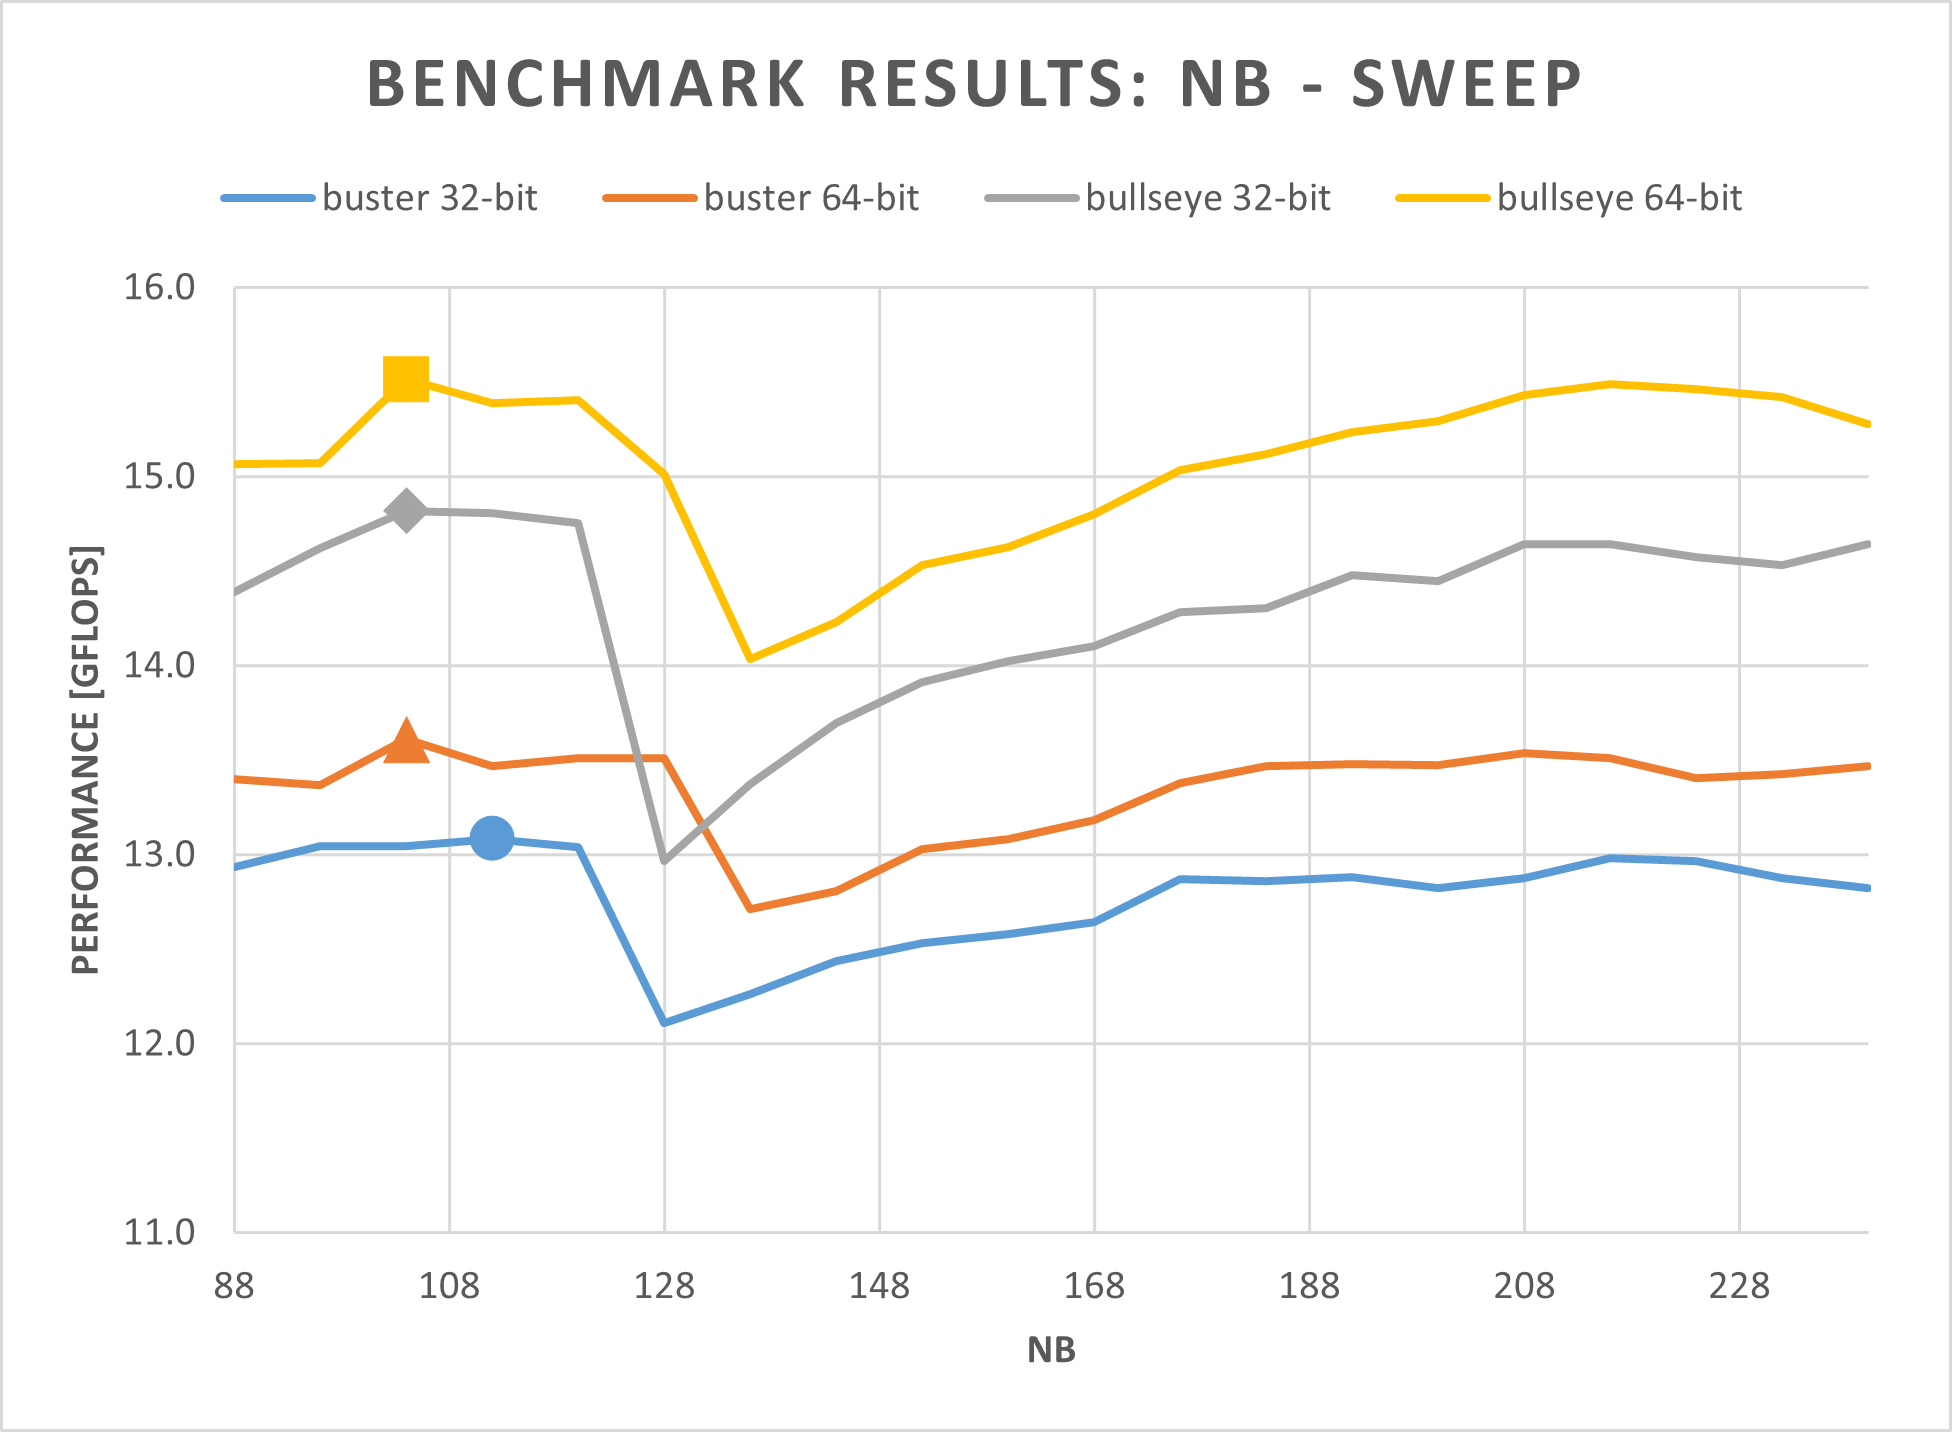 figure of the NB sweep benchmark results